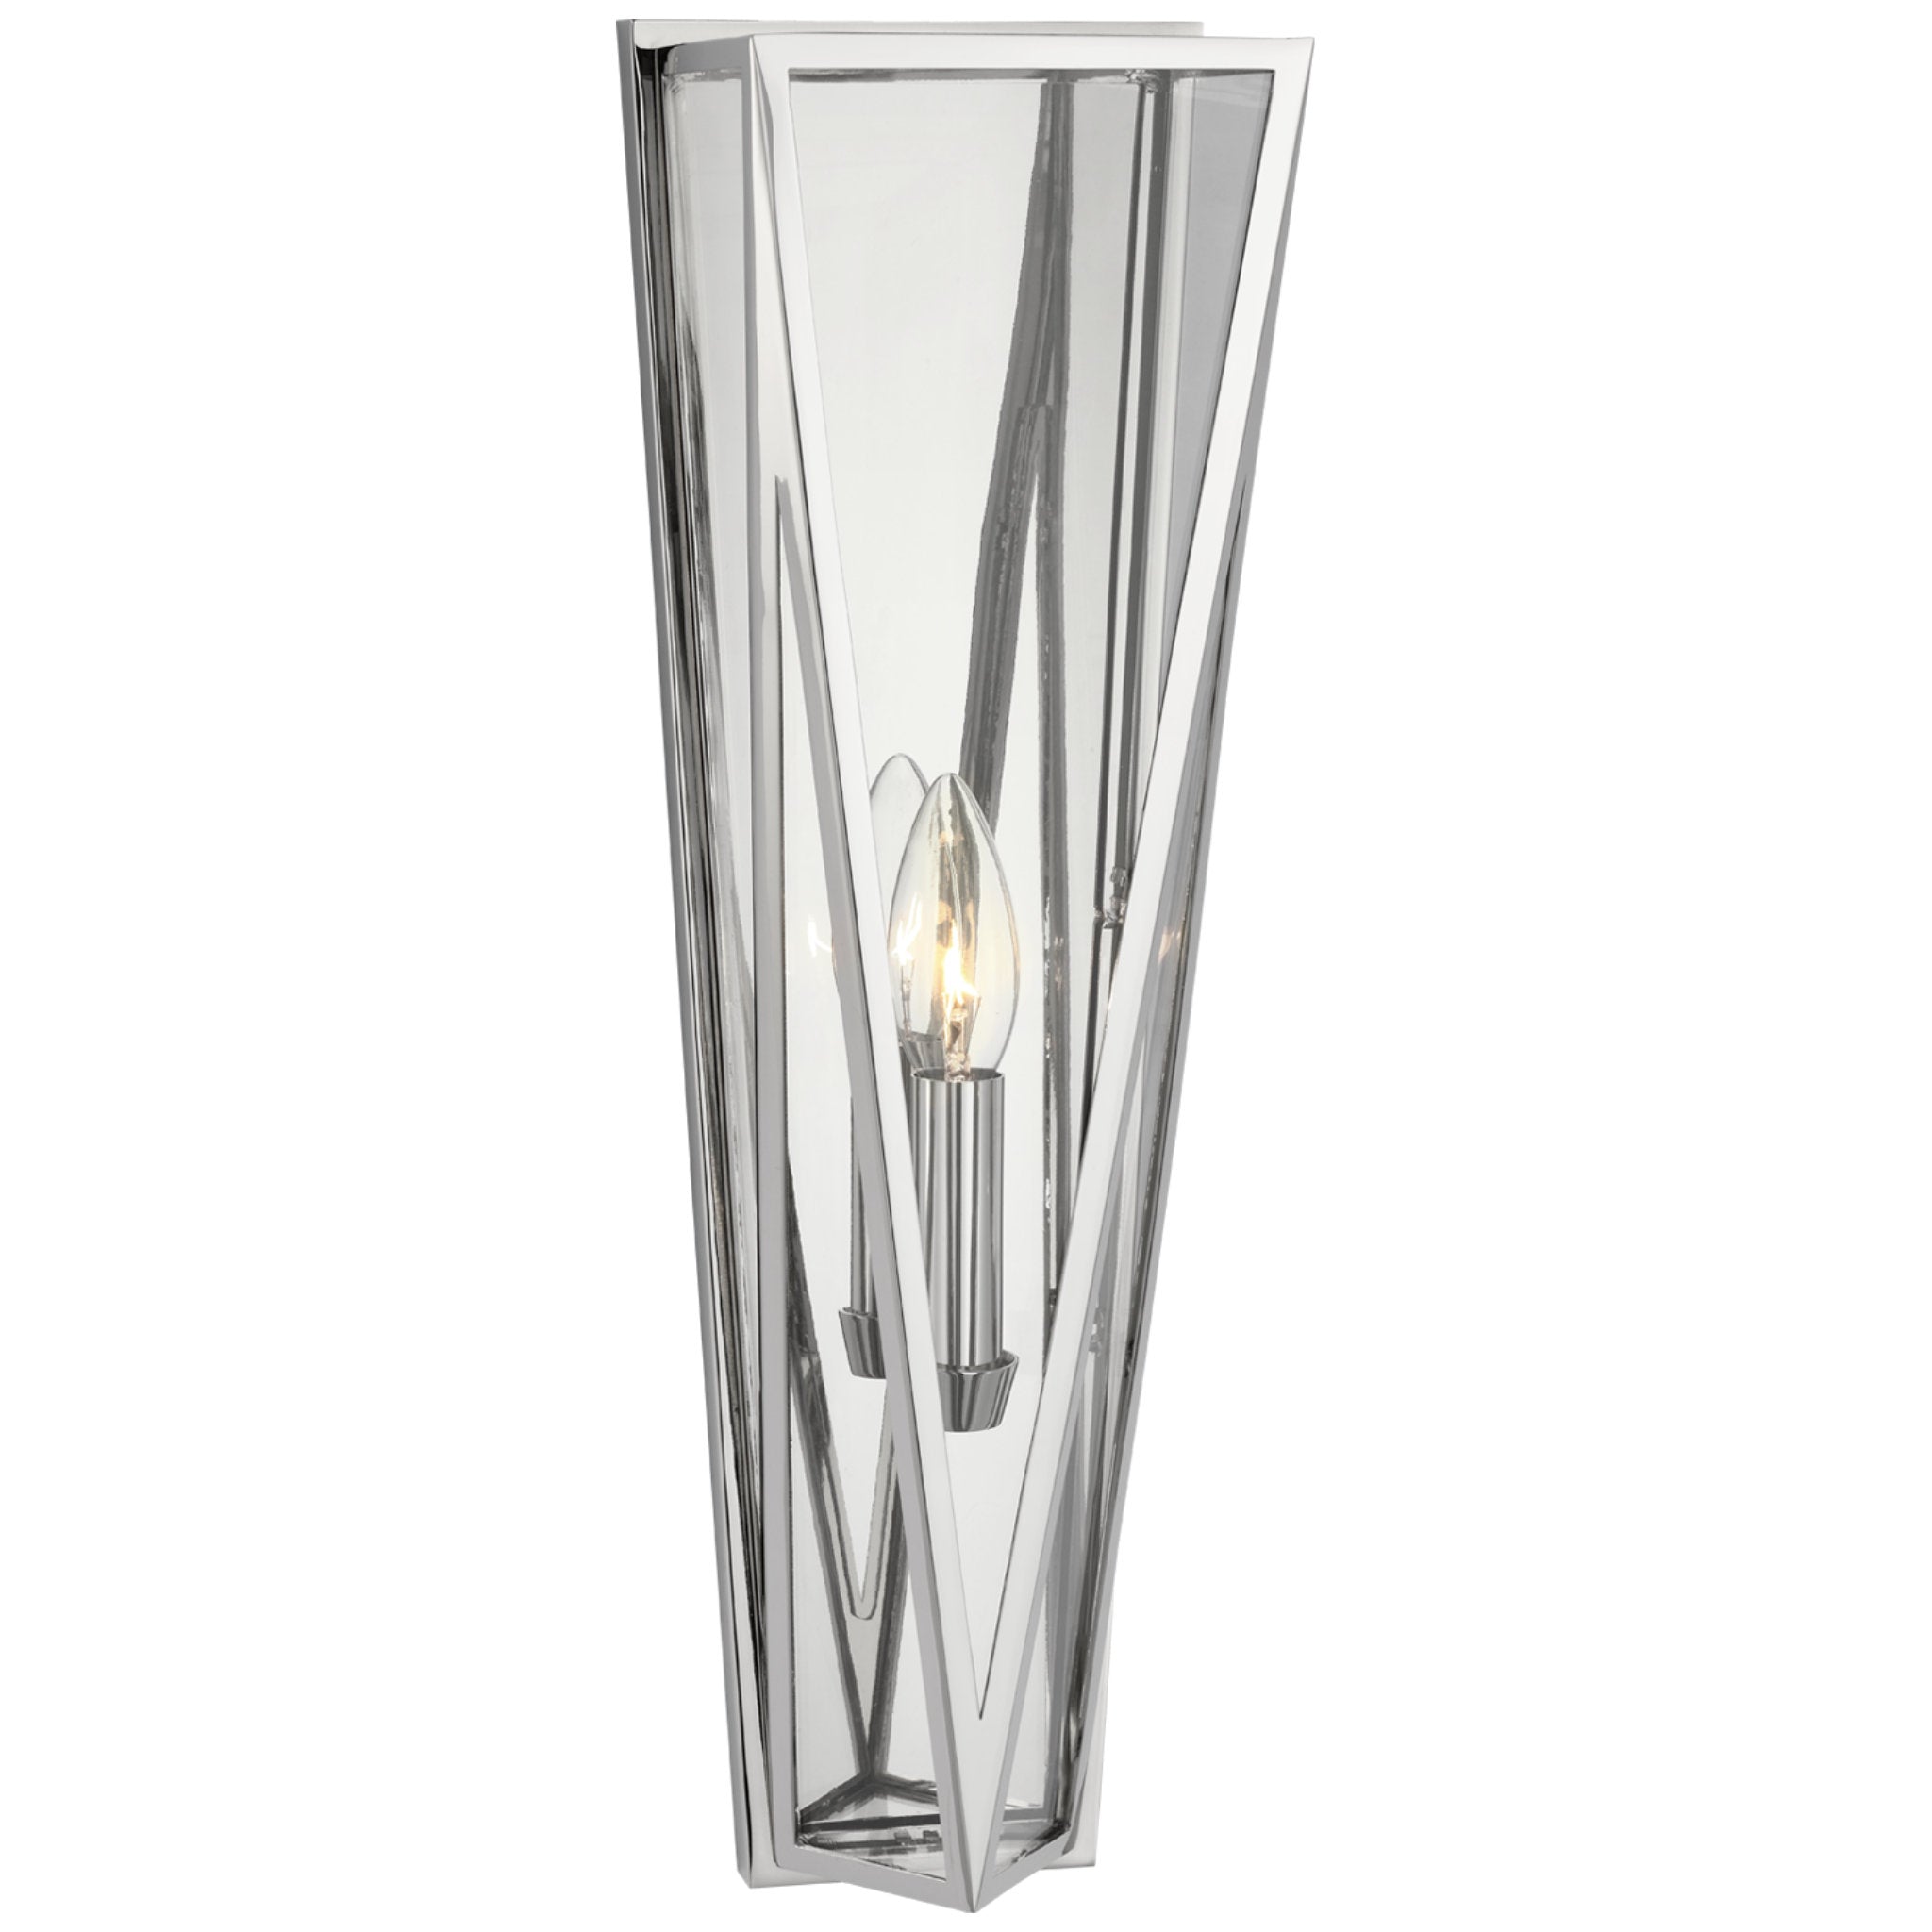 Julie Neill Lorino Medium Sconce in Polished Nickel with Clear Glass